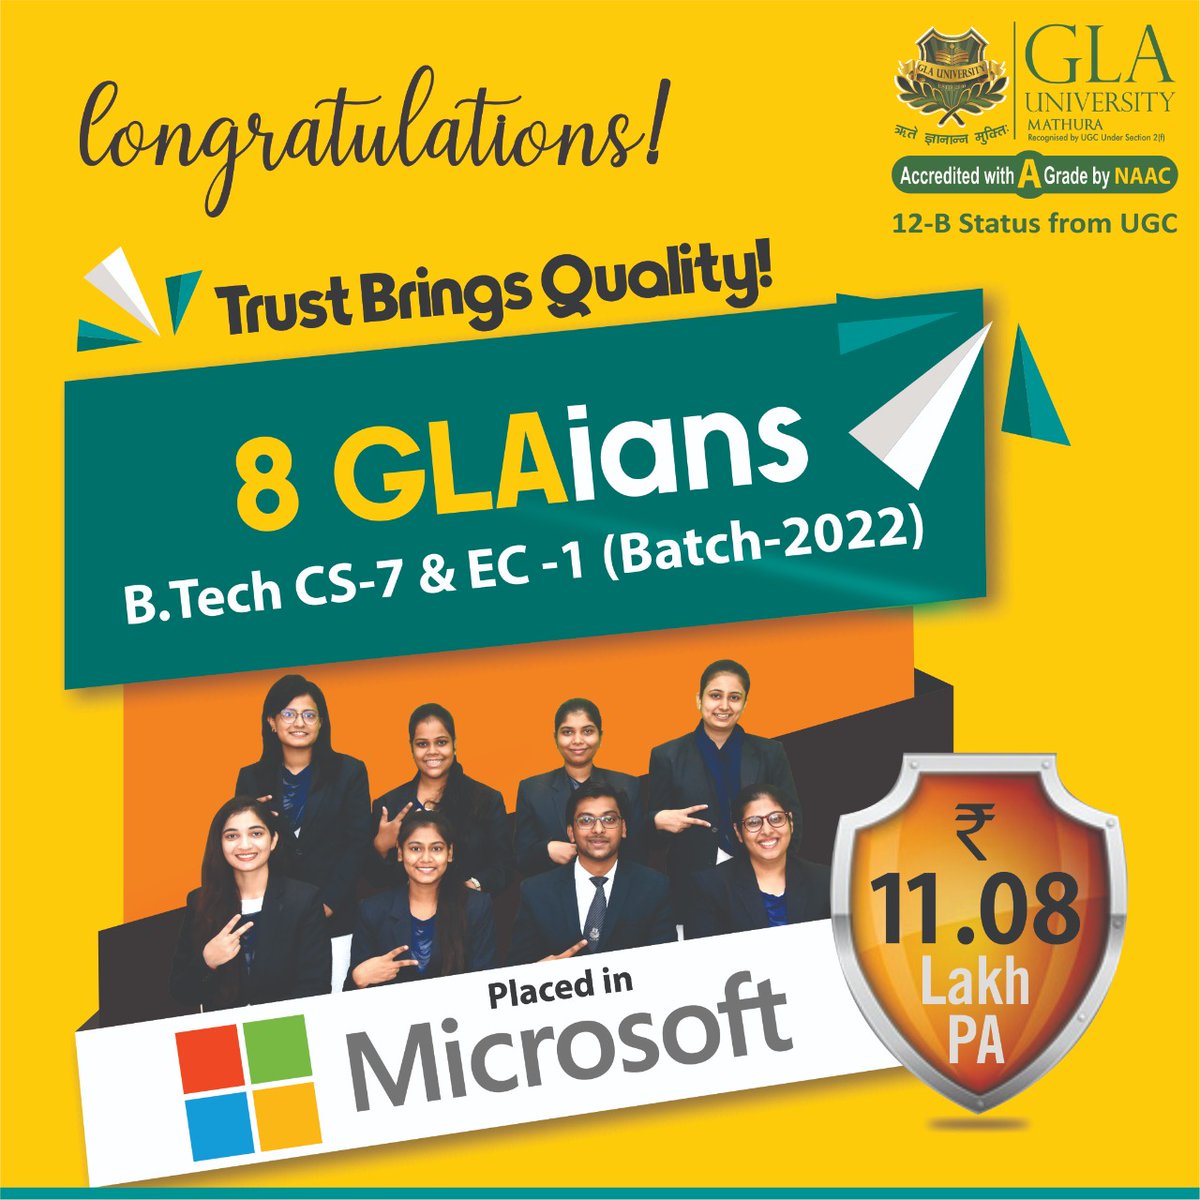 Great placement for 2022 batch & still counting by @GLA_Mathura Proud to be part of GLAU #GLAUniversity #GLAU #UttarPradeshNews #Mathura #UniversityPlacements #PlacementsSeason2022